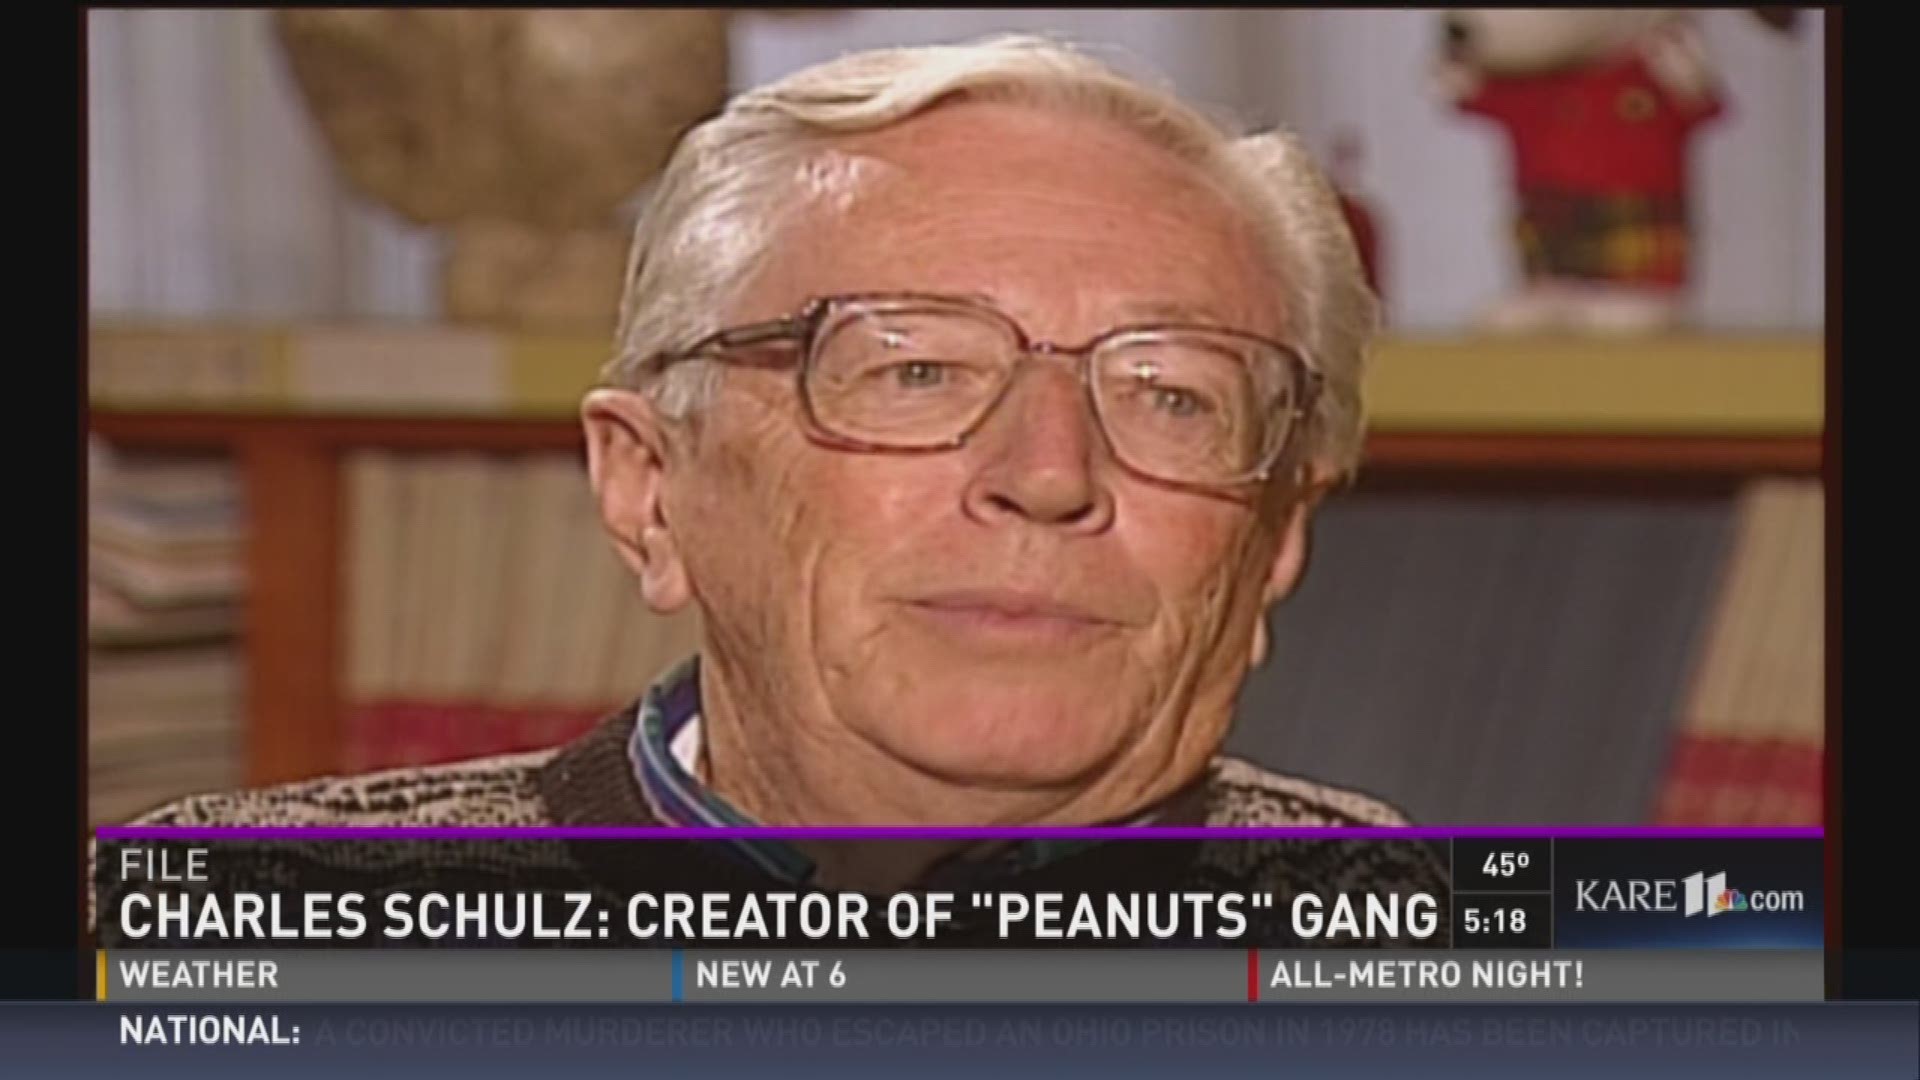 1990's interview with Charles Schulz, creator of 'Peanuts' gang